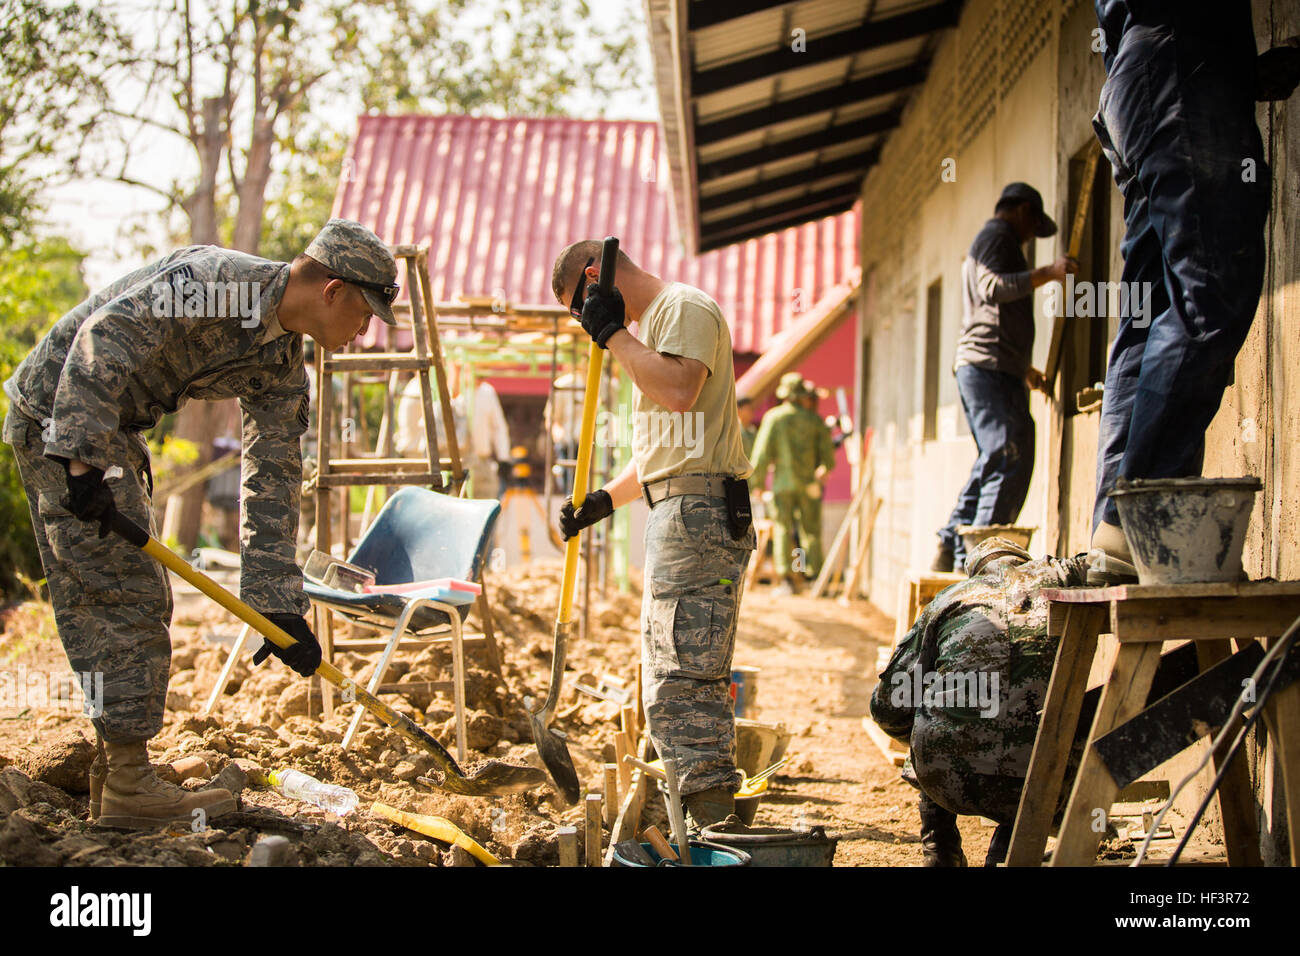 Service members from the U.S. and Royal Thai Air Forces, Singapore and People's Republic of China, People's Liberation Army build a classroom at the Wat Ban Mak school, Saraburi, Thailand, during exercise Cobra Gold, Feb. 9, 2016. Cobra Gold, in its 35th iteration, focuses on humanitarian civic action, community engagement, and medical activities to support the needs and humanitarian interest of civilian populations around the region. (U.S. Marine Corps Combat Camera photo by Cpl. Wesley Timm/Released) Construction Continues at the Wat Ban Mak School During Exercise Cobra Gold 160209-M-AR450-0 Stock Photo